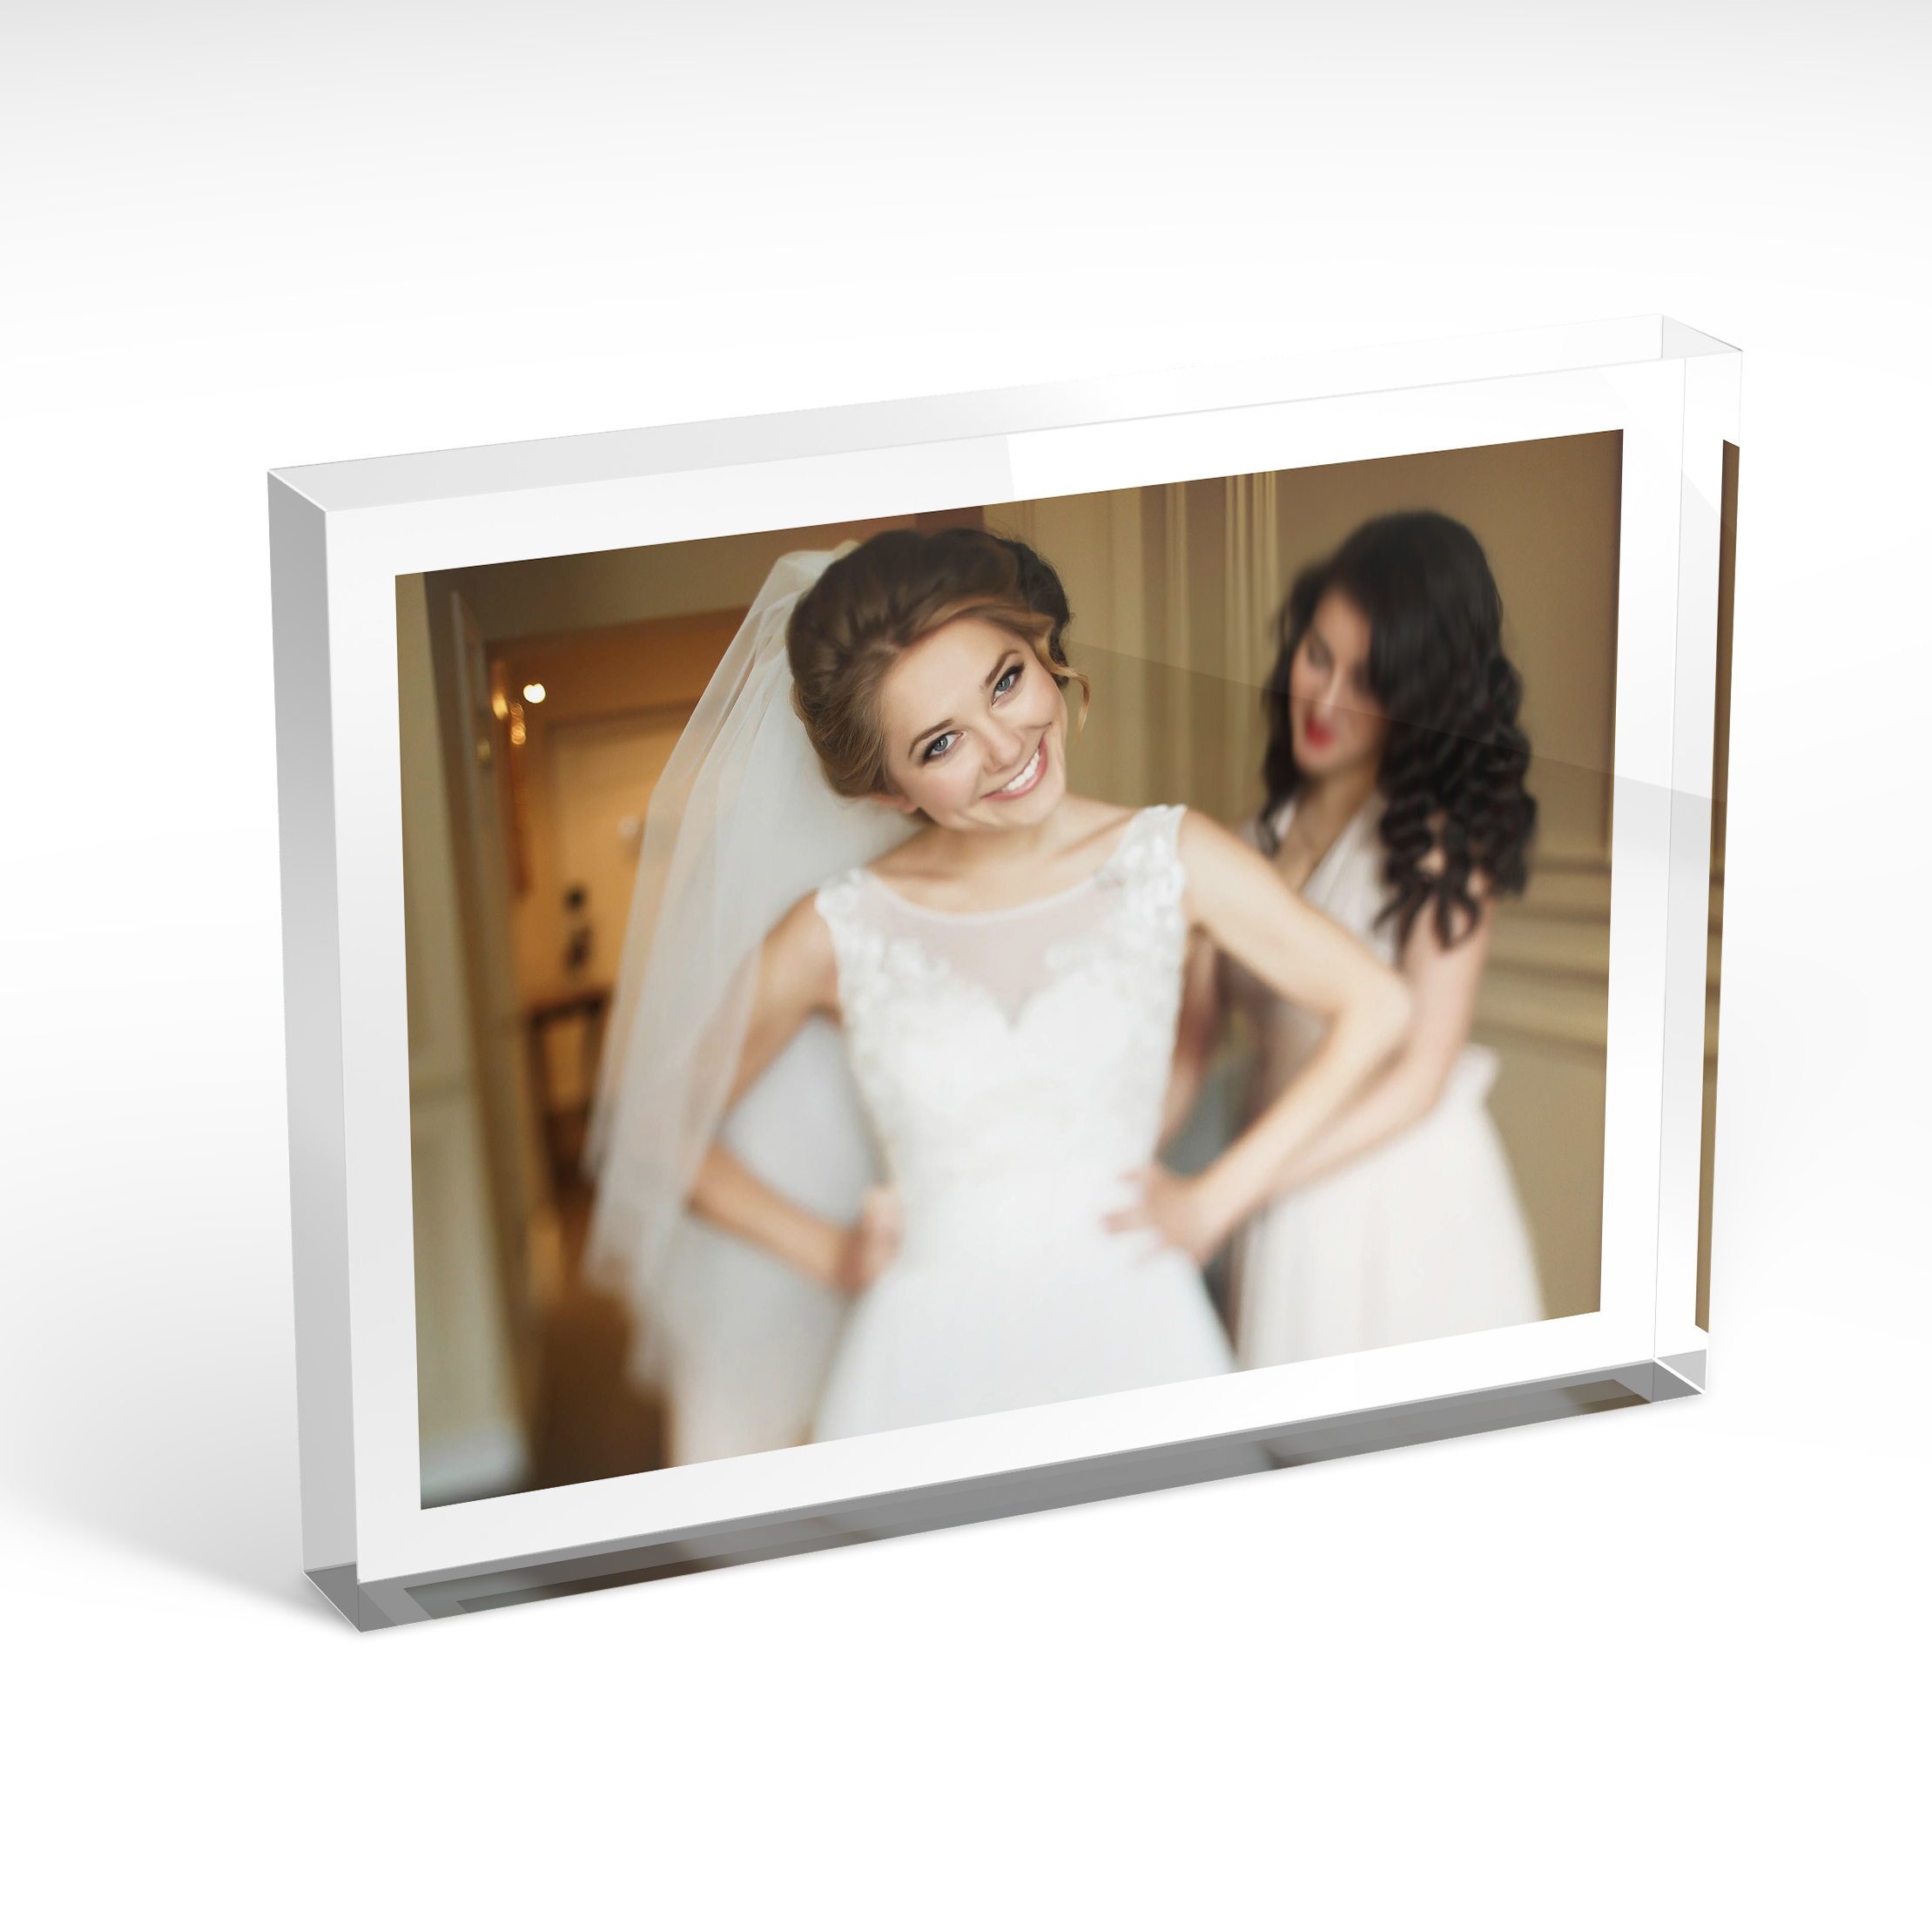 A front side view of a landscape layout Perspex Photo Blocks with space for 1 photo. Thiis design is named 'Landscape White'. 